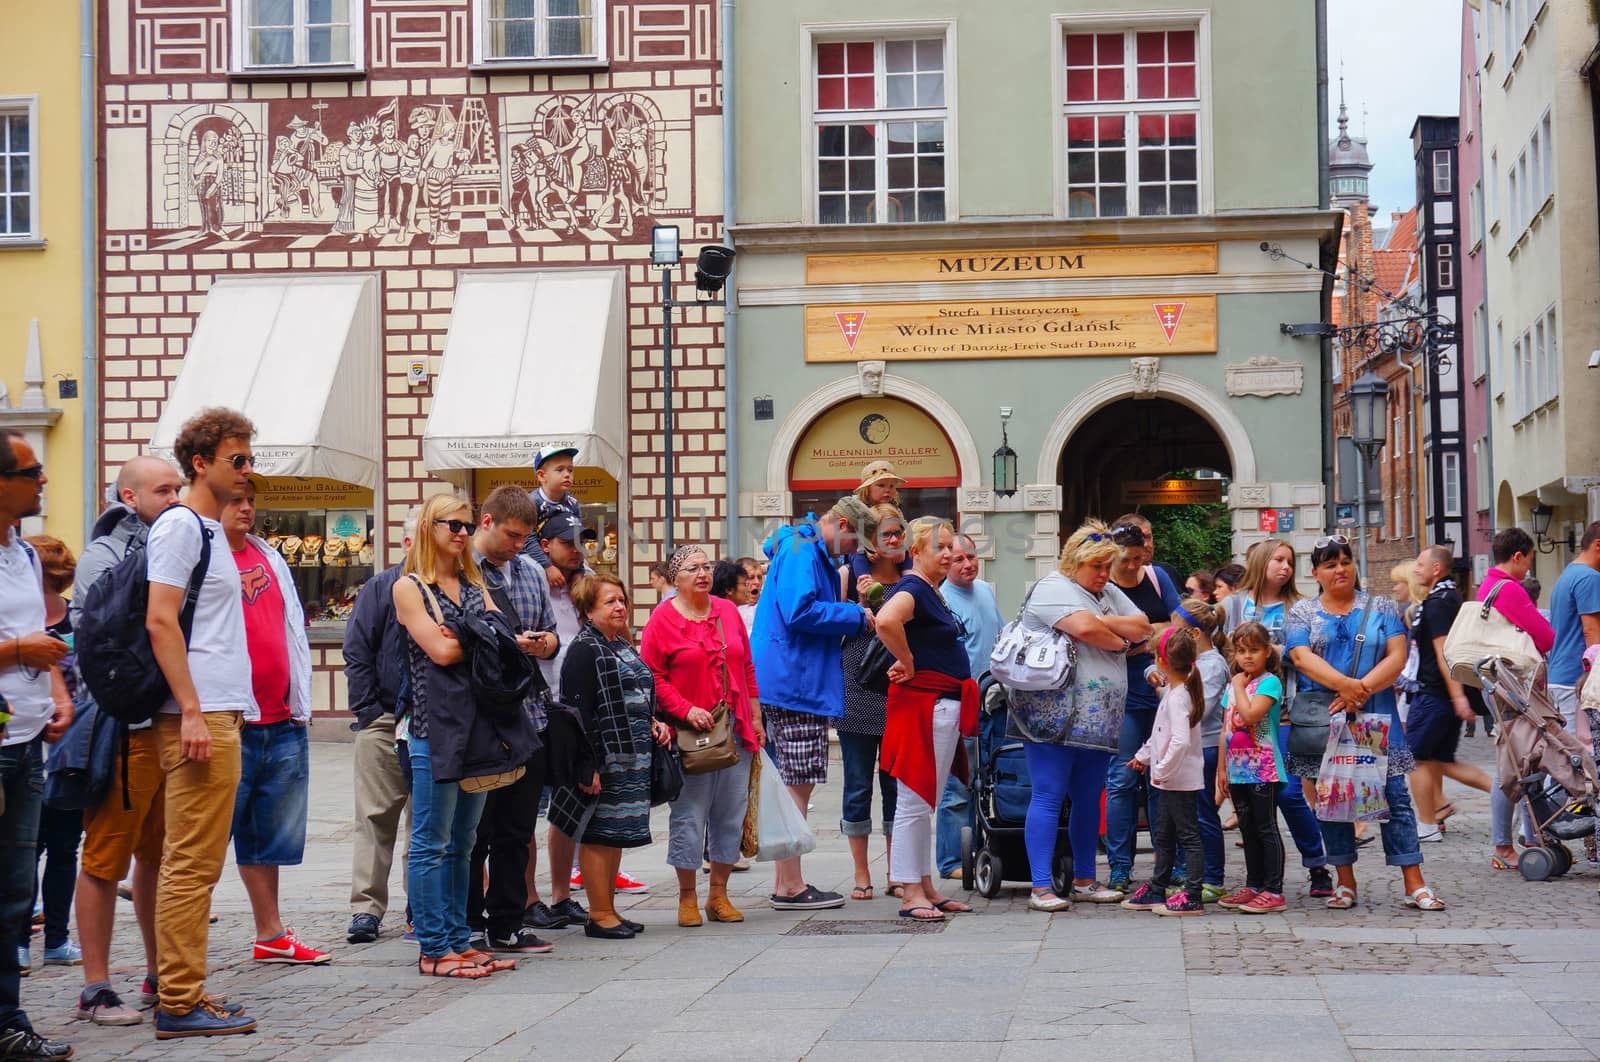 GDANSK, POLAND - JULY 29, 2015: Group of people looking at something in the city center